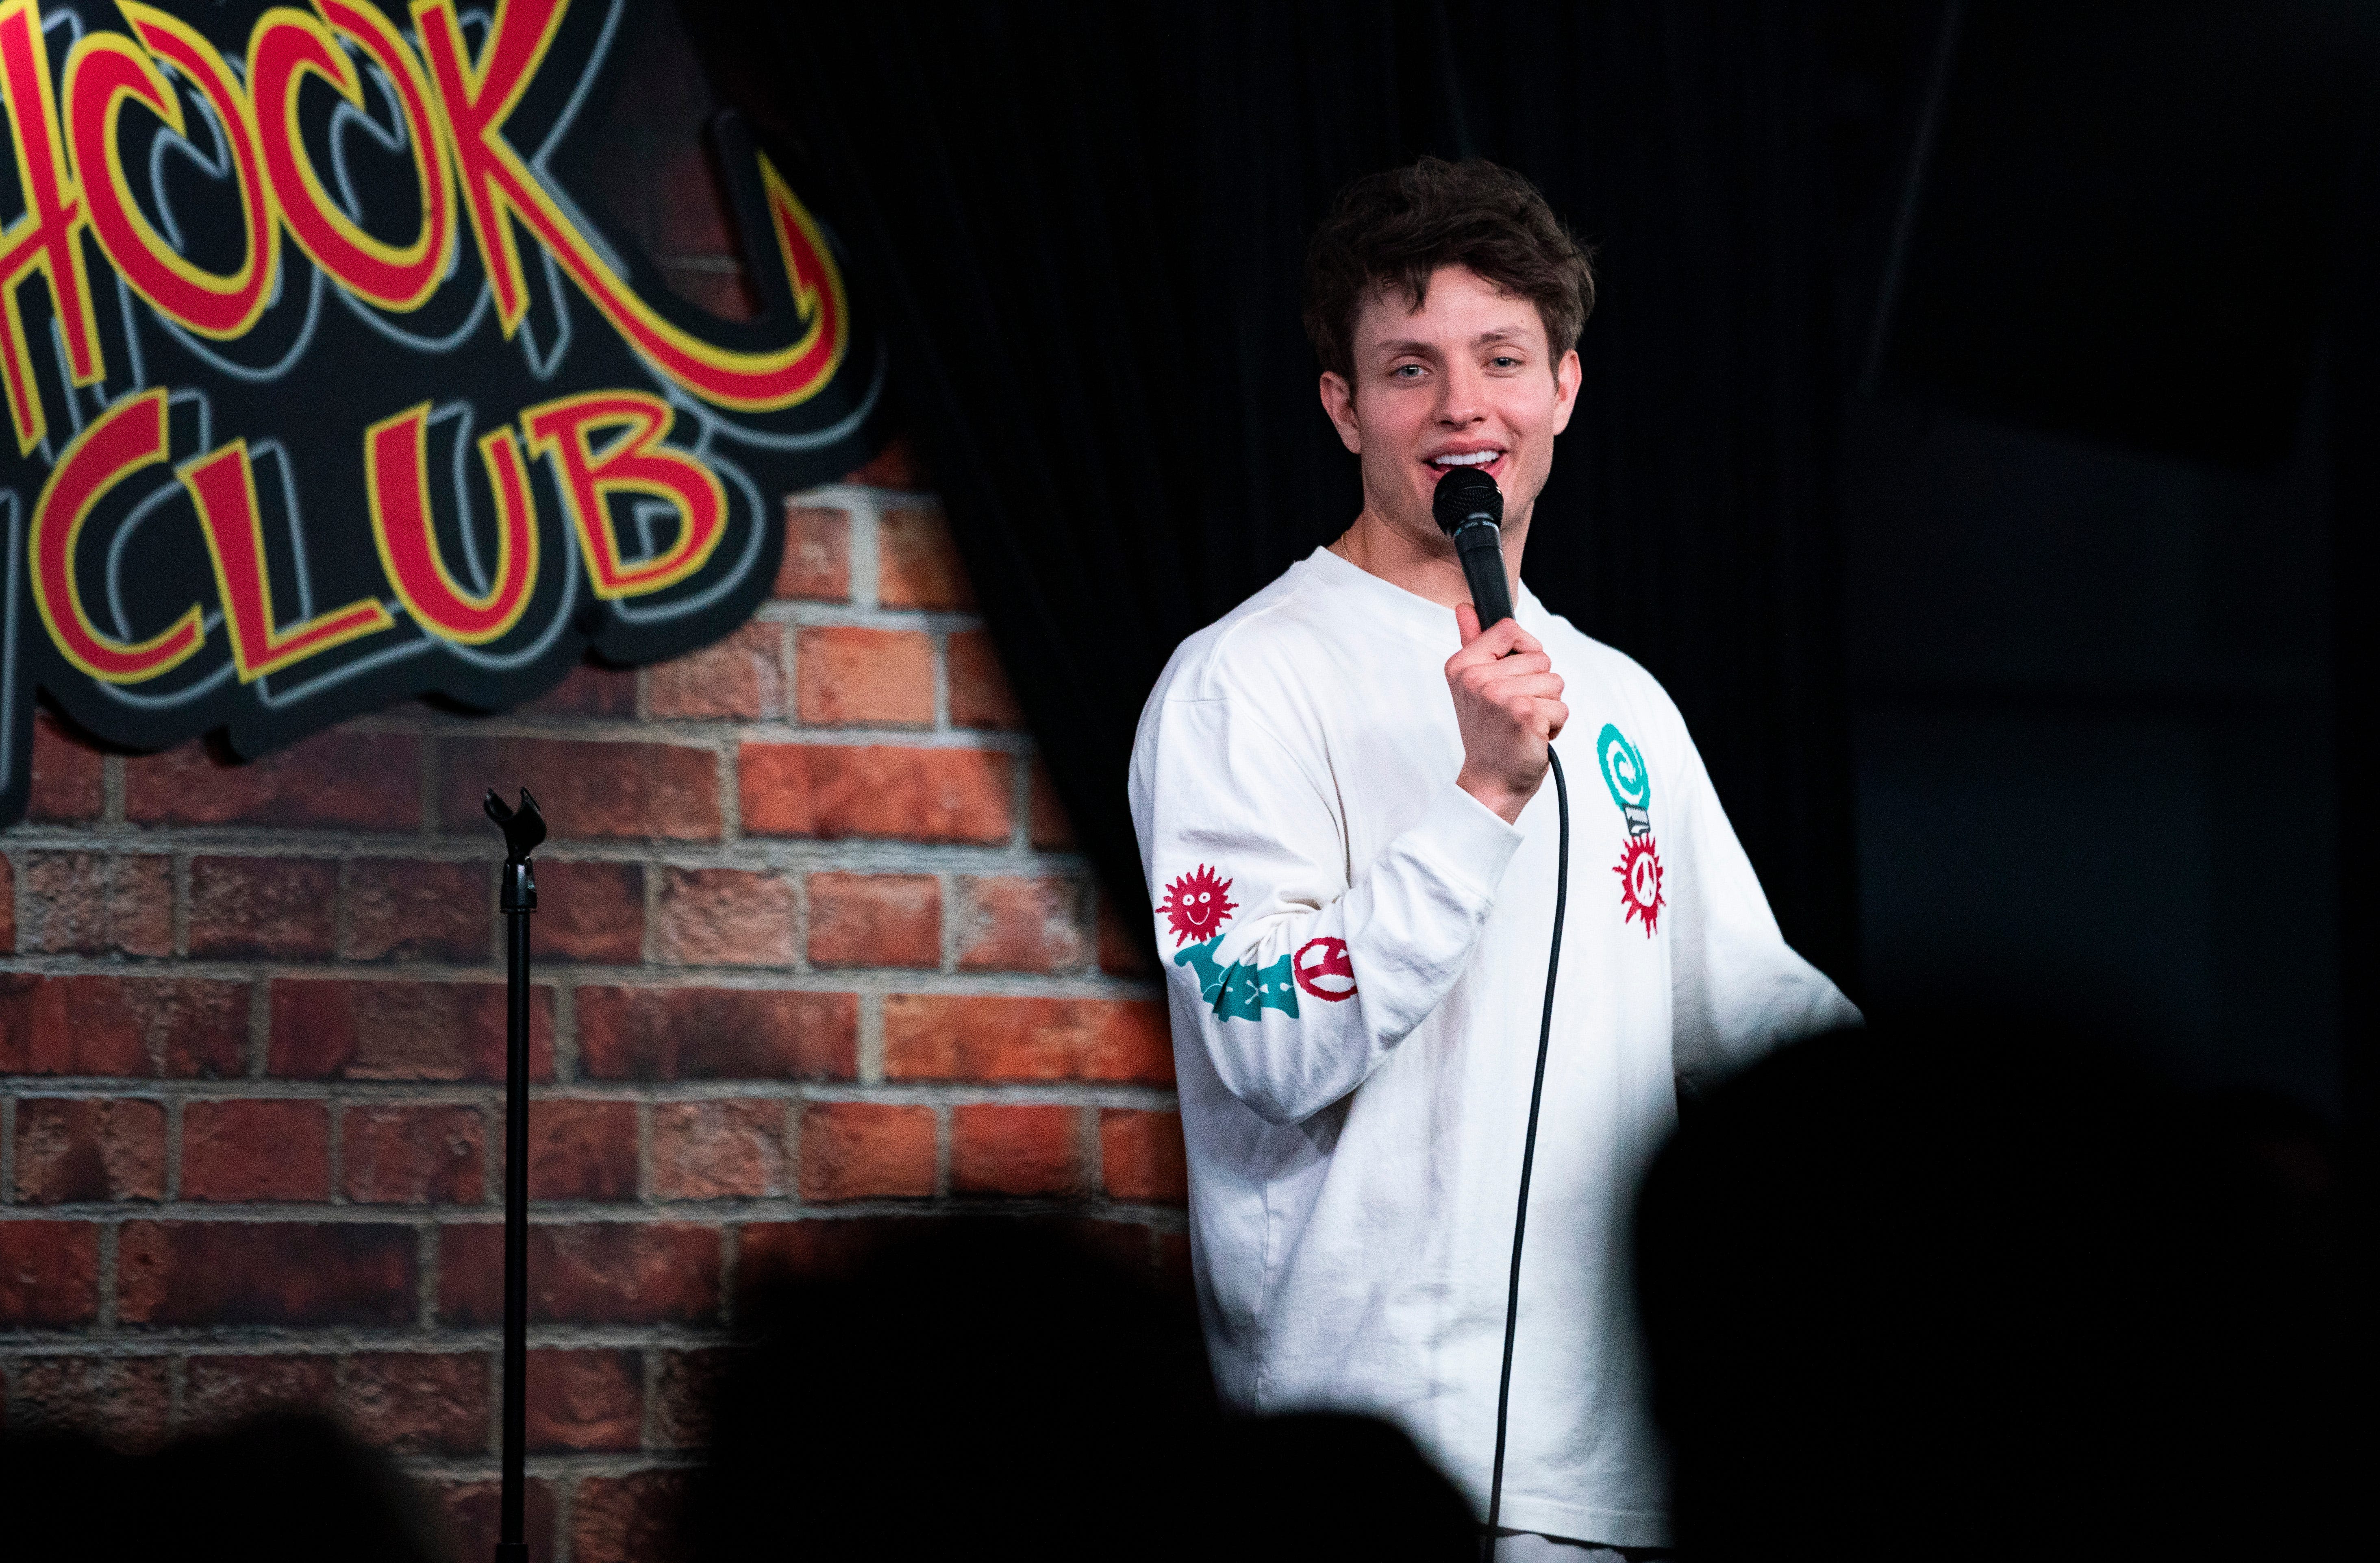 Comedian Matt Rife set to resume tour with sold-out Memphis shows after break for exhaustion